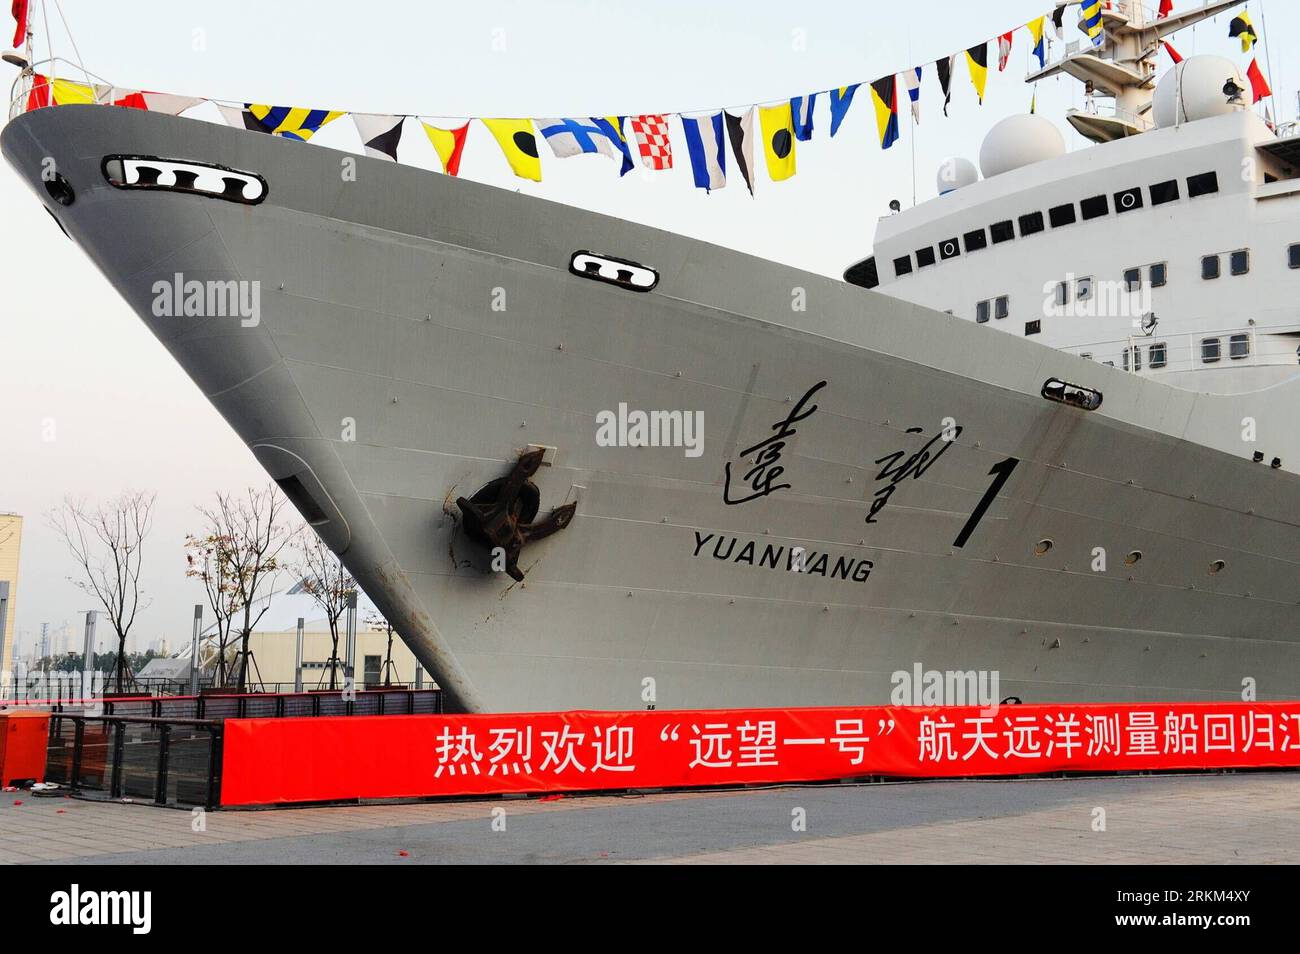 Bildnummer: 56516611  Datum: 27.11.2011  Copyright: imago/Xinhua (111127) -- SHANGHAI, Nov. 27, 2011 (Xinhua) -- The Yuanwang I Space Tracking Ship moors at the World Expo Park in Shanghai, east China, Nov. 27, 2011. Yuanwang I , China s first vessel for tracking and controlling rockets and spacecrafts that was retired in 2010 after 32 years on service, was moved to Shanghai s World Expo Park on Saturday. The vessel will serve as a museum for scientific eduction. (Xinhua/Guo Changyao) (ljh) CHINA-SHANGHAI- YUANWANG I -WORLD EXPO PARK-MOVE-IN (CN) PUBLICATIONxNOTxINxCHN Gesellschaft Museum Muse Stock Photo